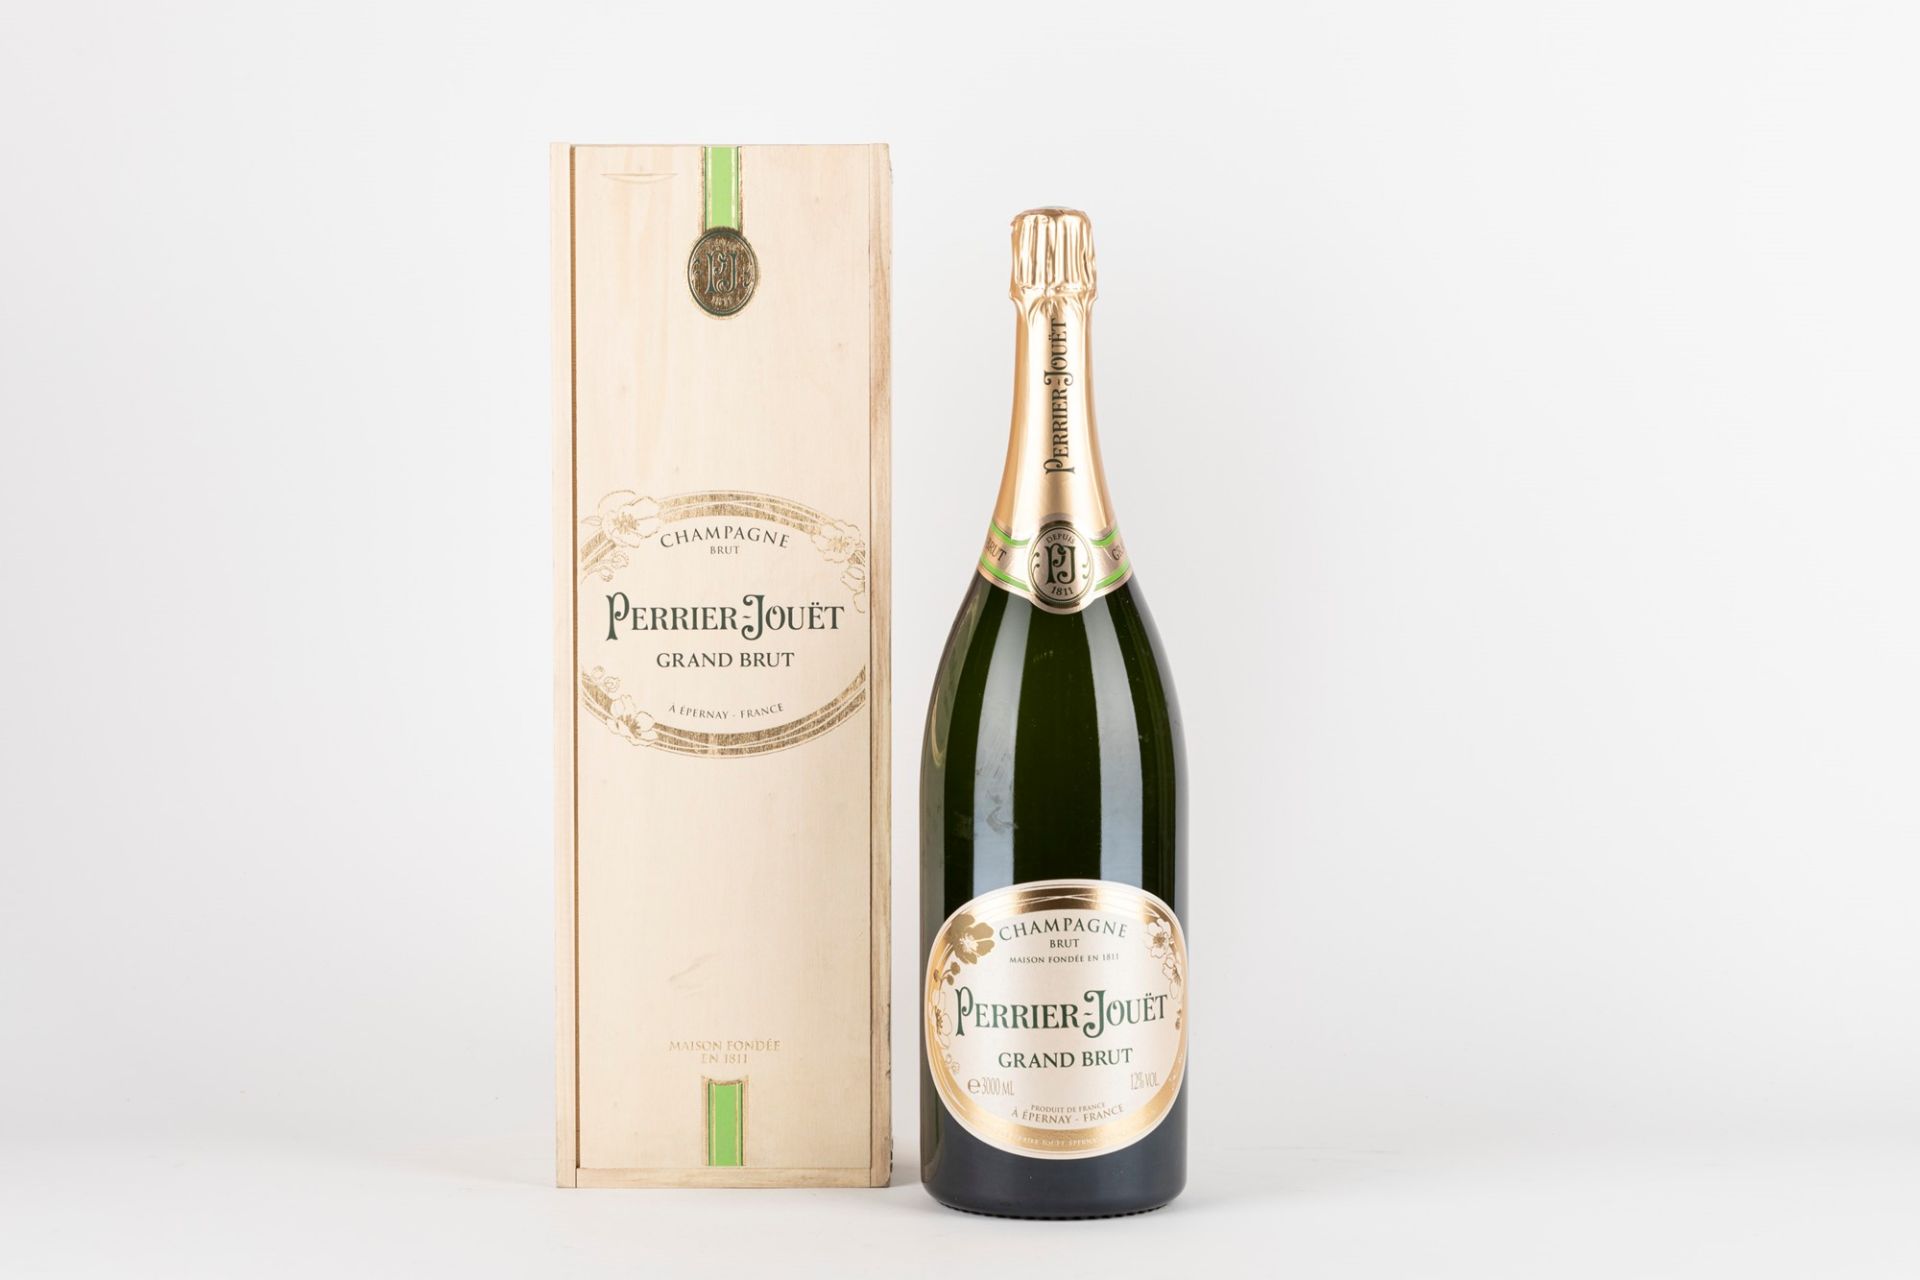 France - Champagne / Perrier Jouet Grand Brut 3 Liters